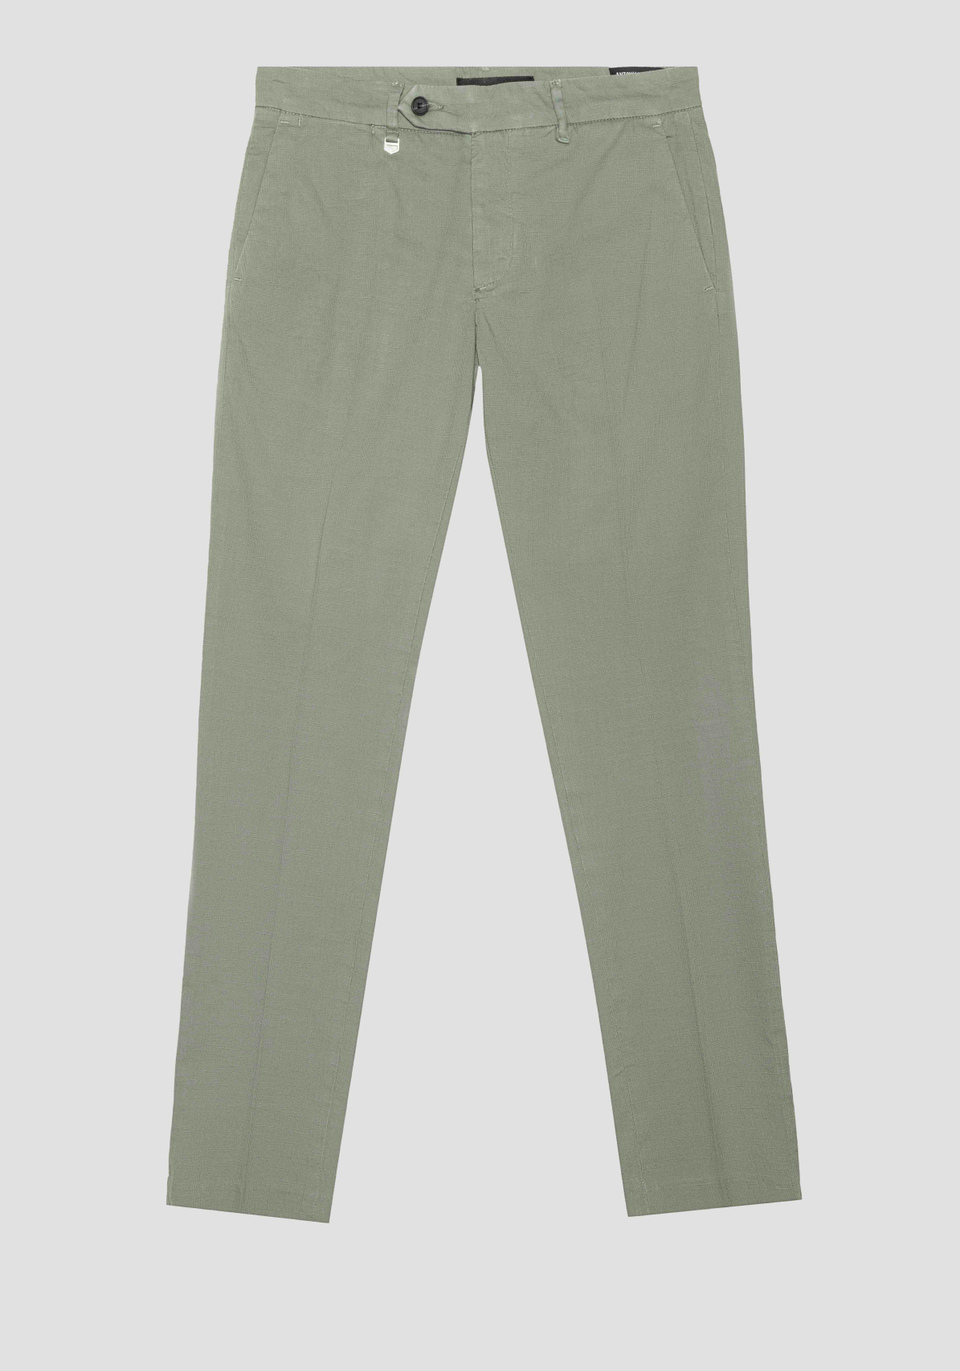 "BRYAN" SKINNY FIT TROUSERS IN ELASTIC COTTON TROUSERS - Antony Morato Online Shop